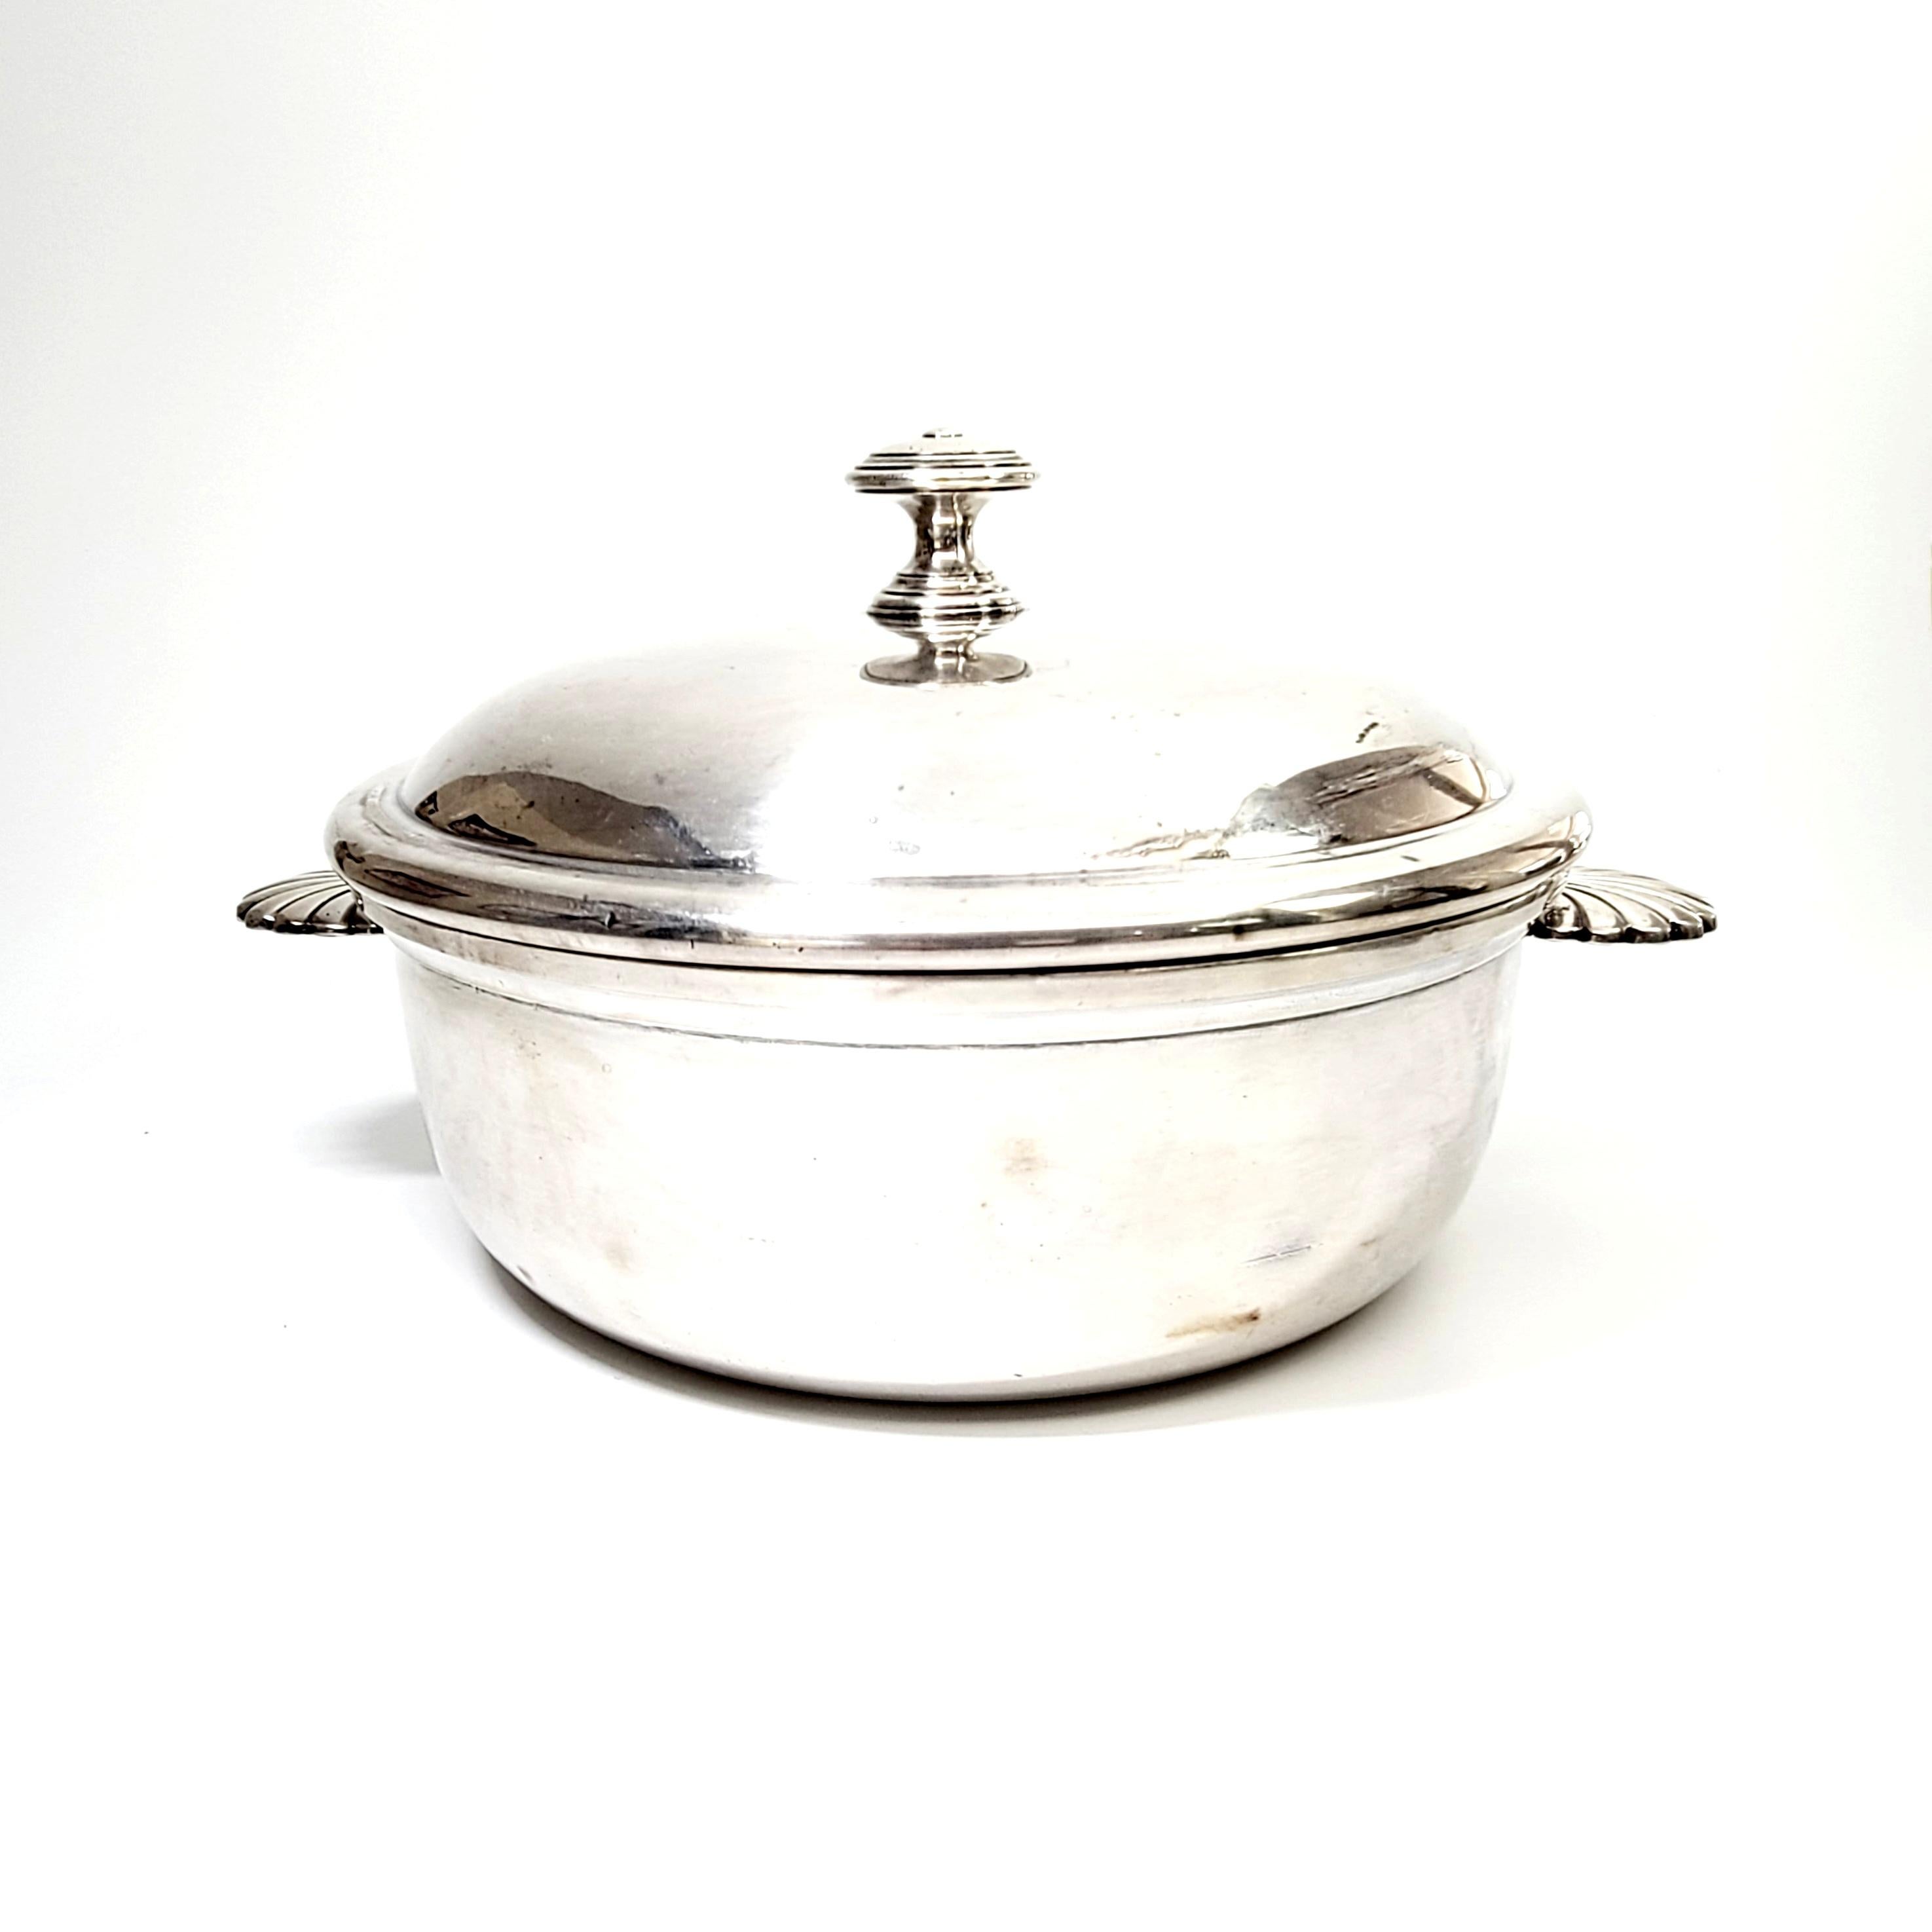 Vintage French silver plate covered vegetable dish by Christofle.

Well known and highly regarded tableware company Christofle is known for beautiful design and high quality craftsmanship. This vegetable bowl features shell motif handles and a lid